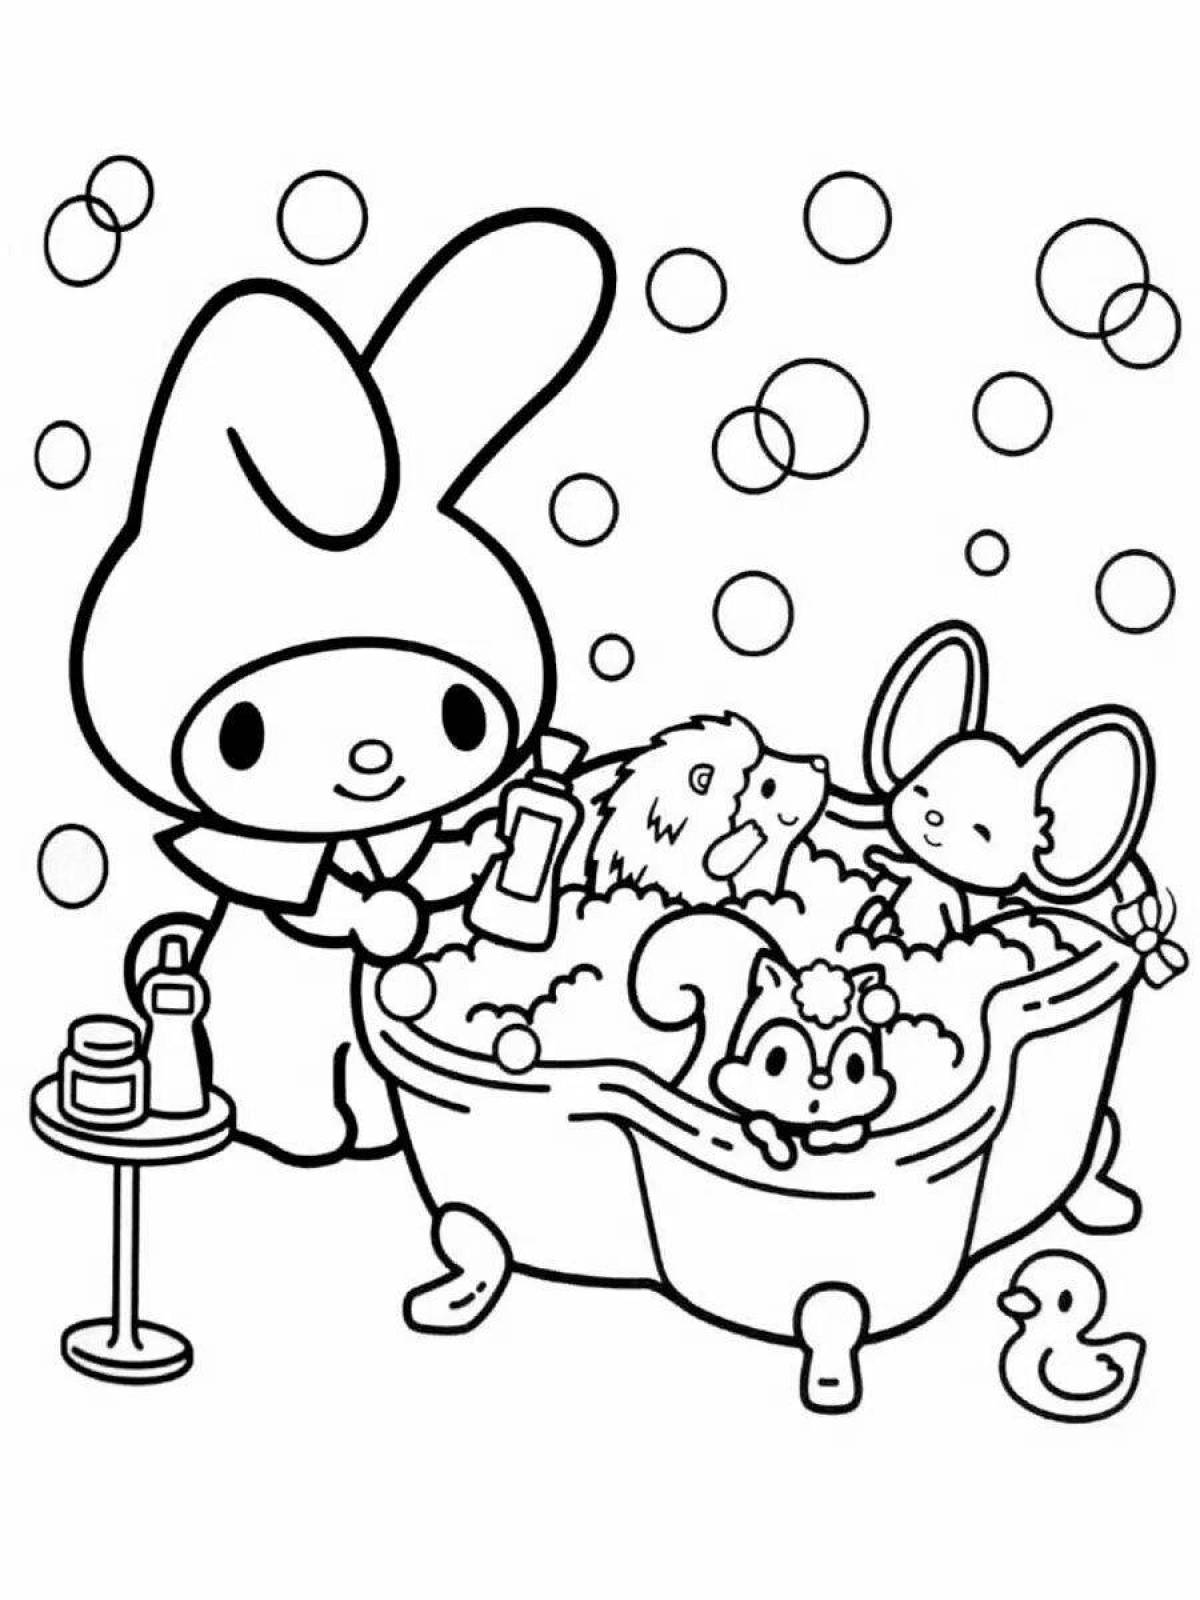 Hello kitty humorous melody and coloring book